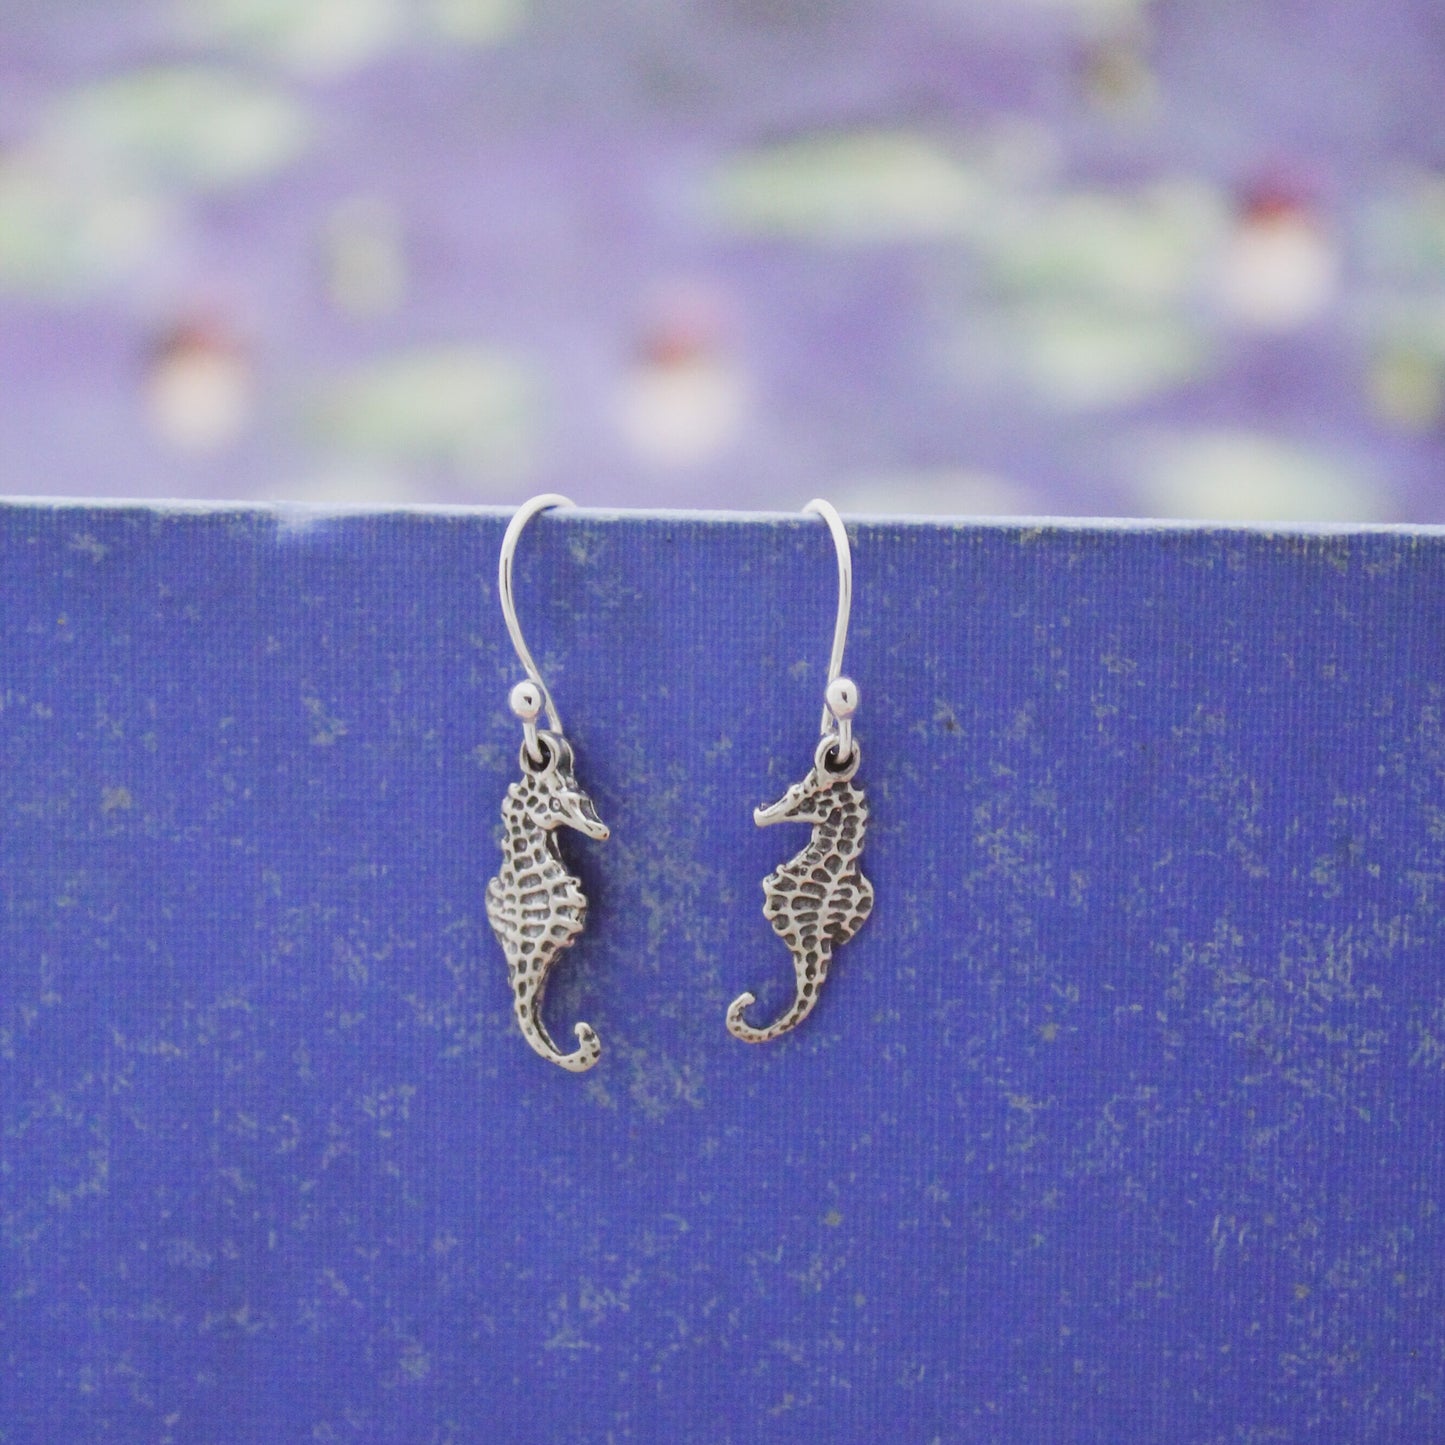 Cute Seahorse Earrings, Sterling Silver Seahorse Beach Jewelry, Marine Life Jewelry, Sterling Silver Shore Jewelry Gift, Gifts for Her